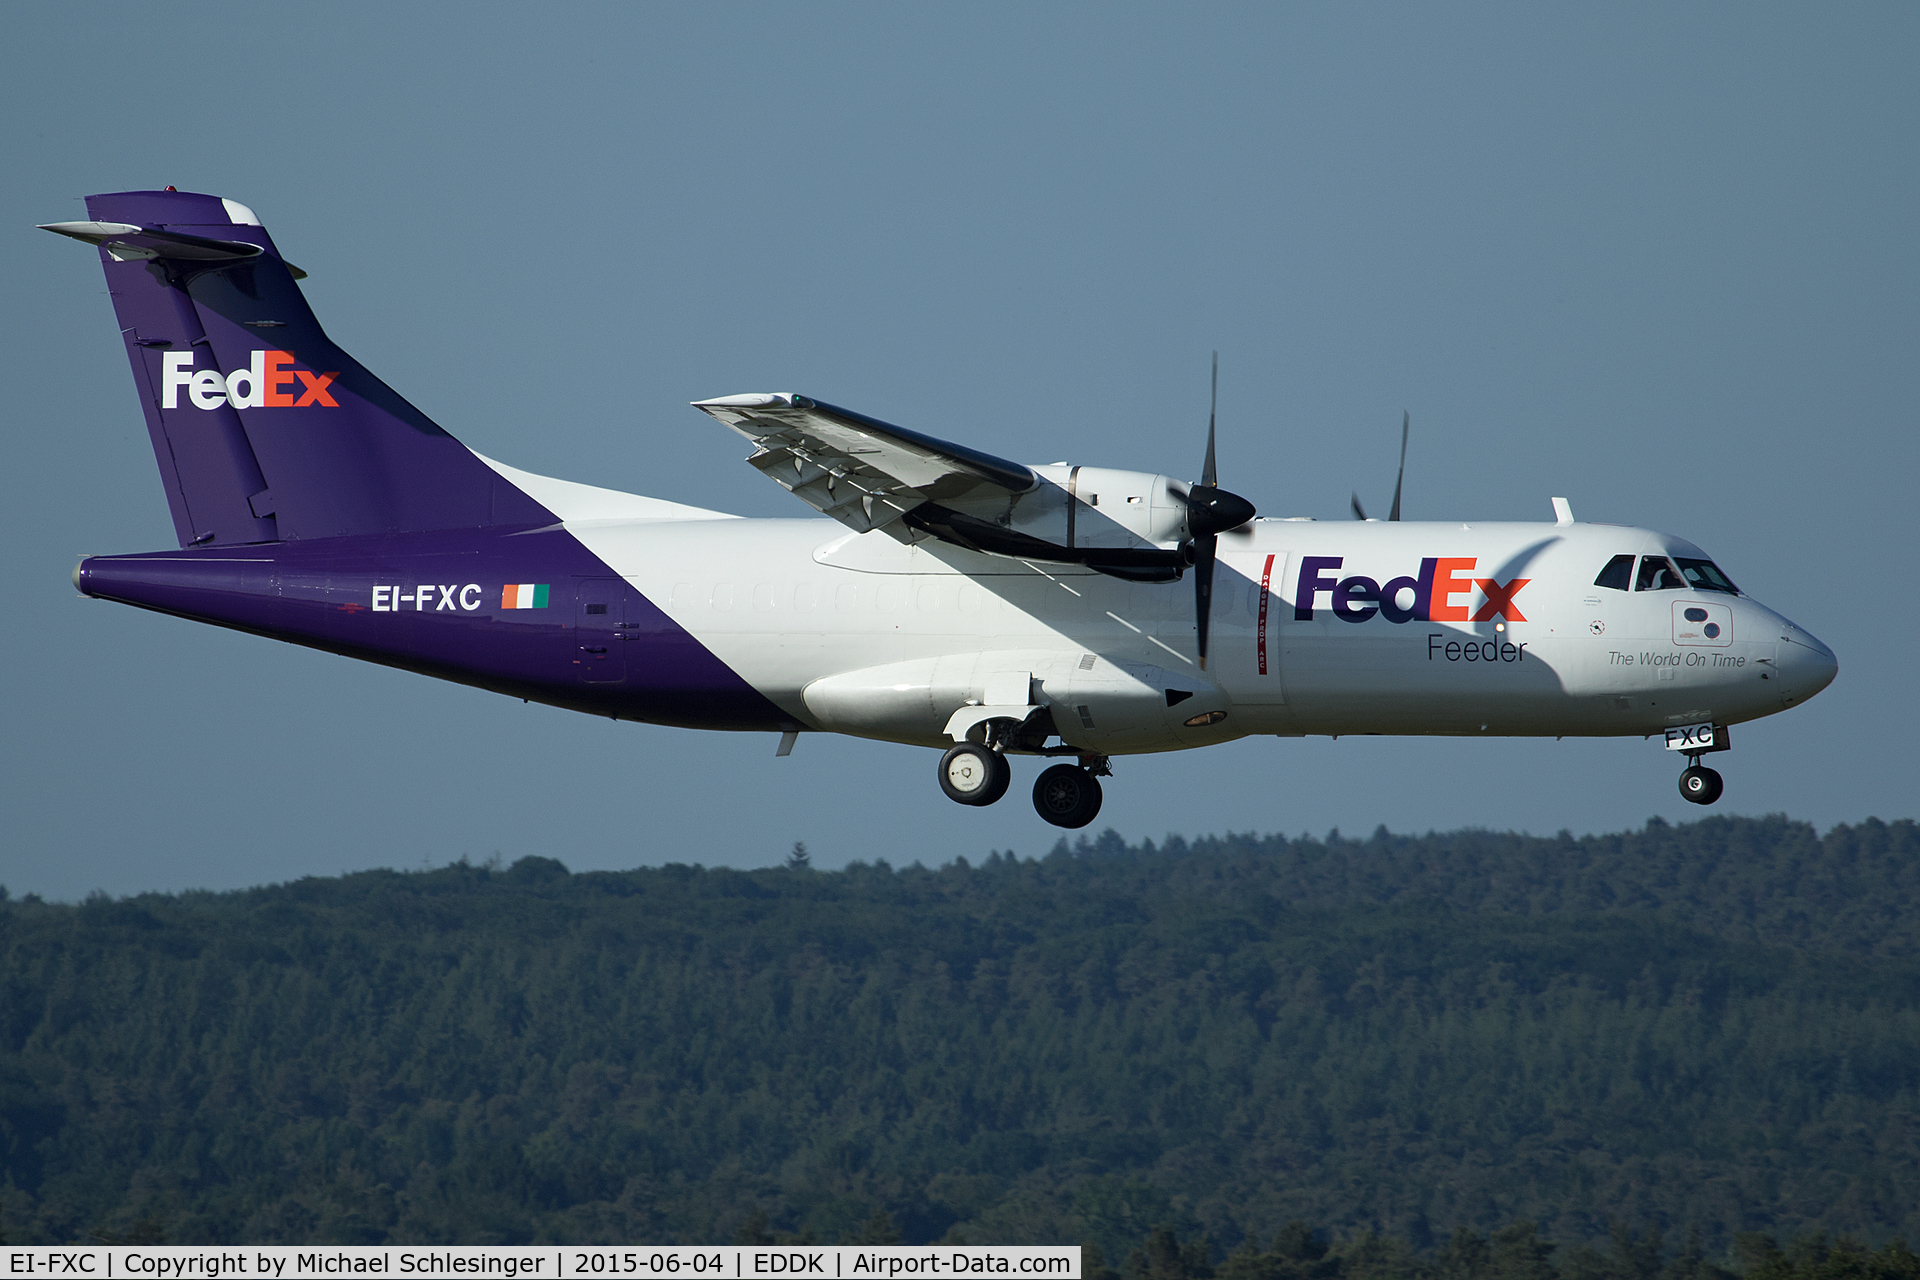 EI-FXC, 1992 ATR 42-300 C/N 310, Short final on runway 14L at the cologne airport